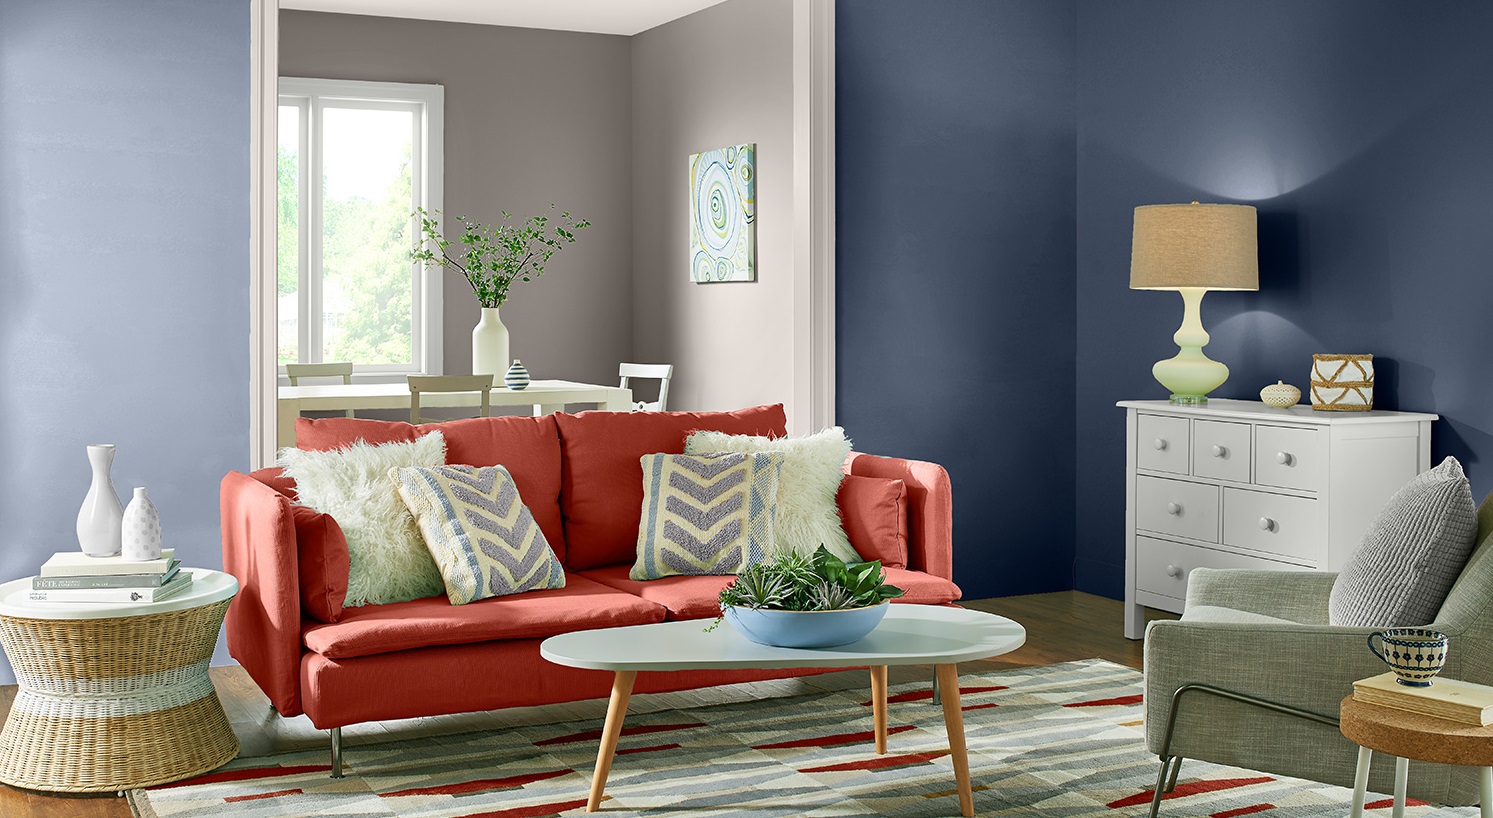 bold. 70+ Hottest Colorful Living Room Decorating Ideas - 56